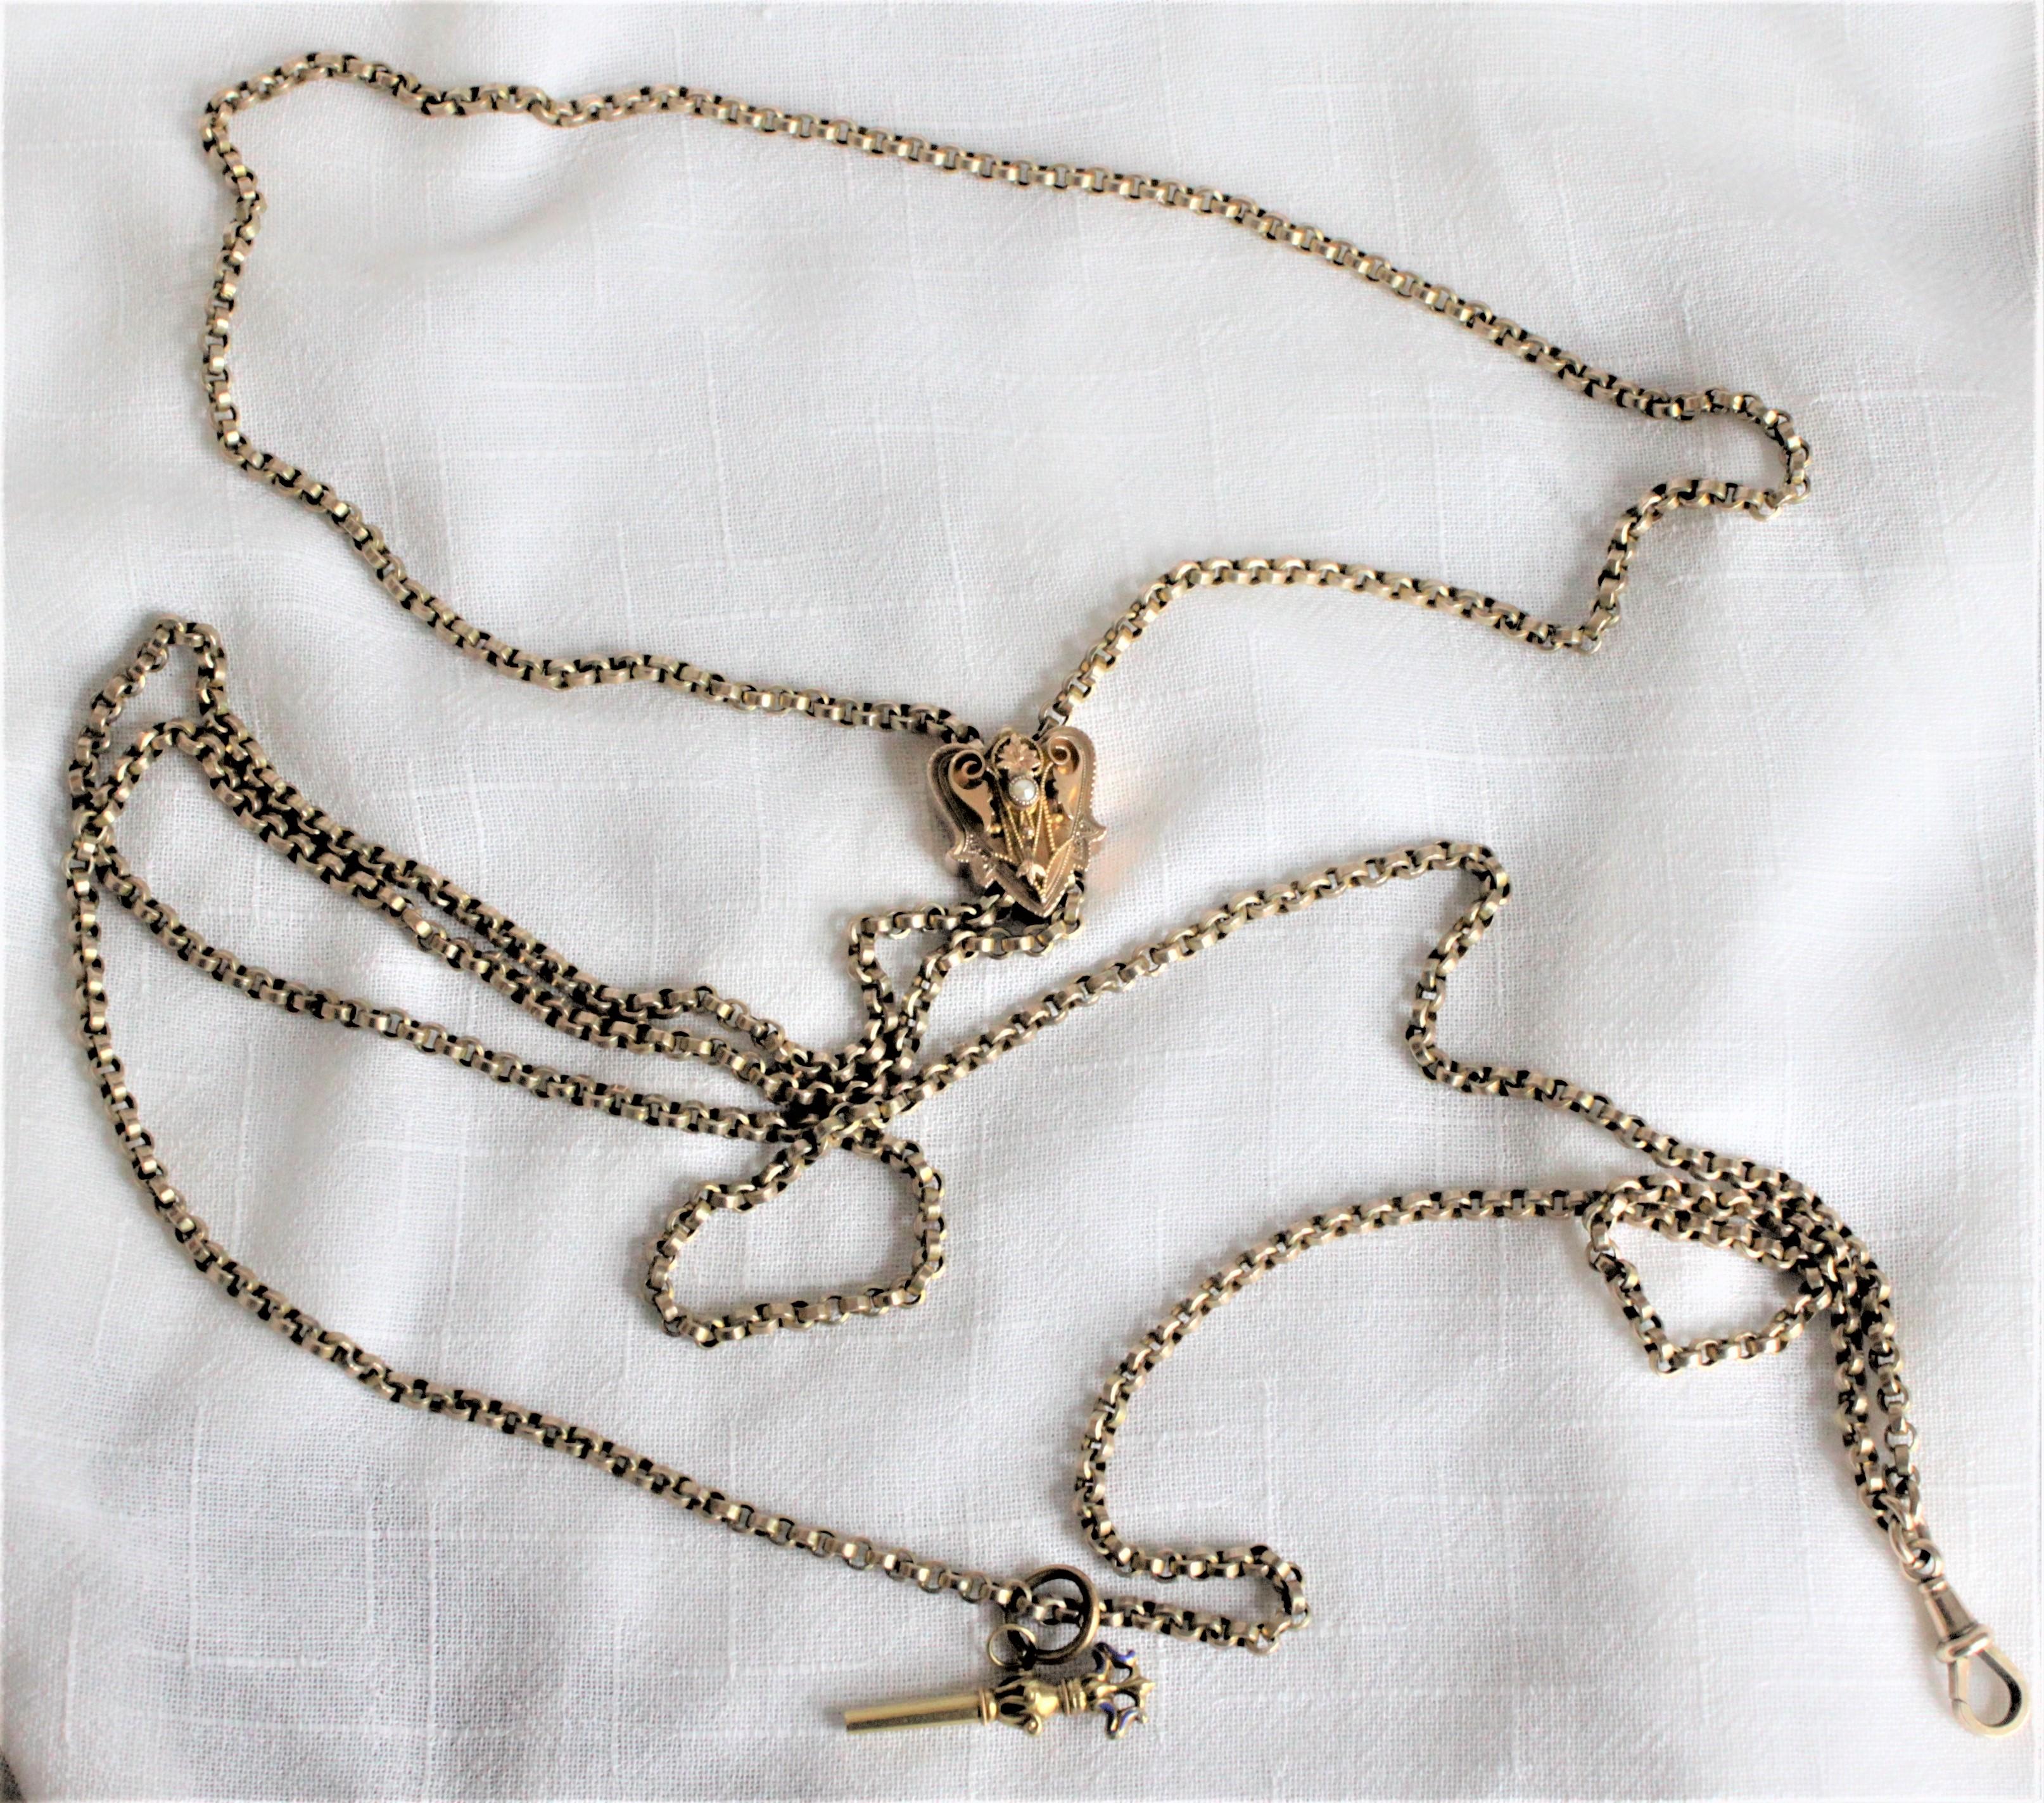 This antique 9-karat yellow gold watch chain is presumed to have originated from England and dates to circa 1880. This long and substantial tight round link chain features a shield shaped slide with ornate decoration and seed pear accents. The gold